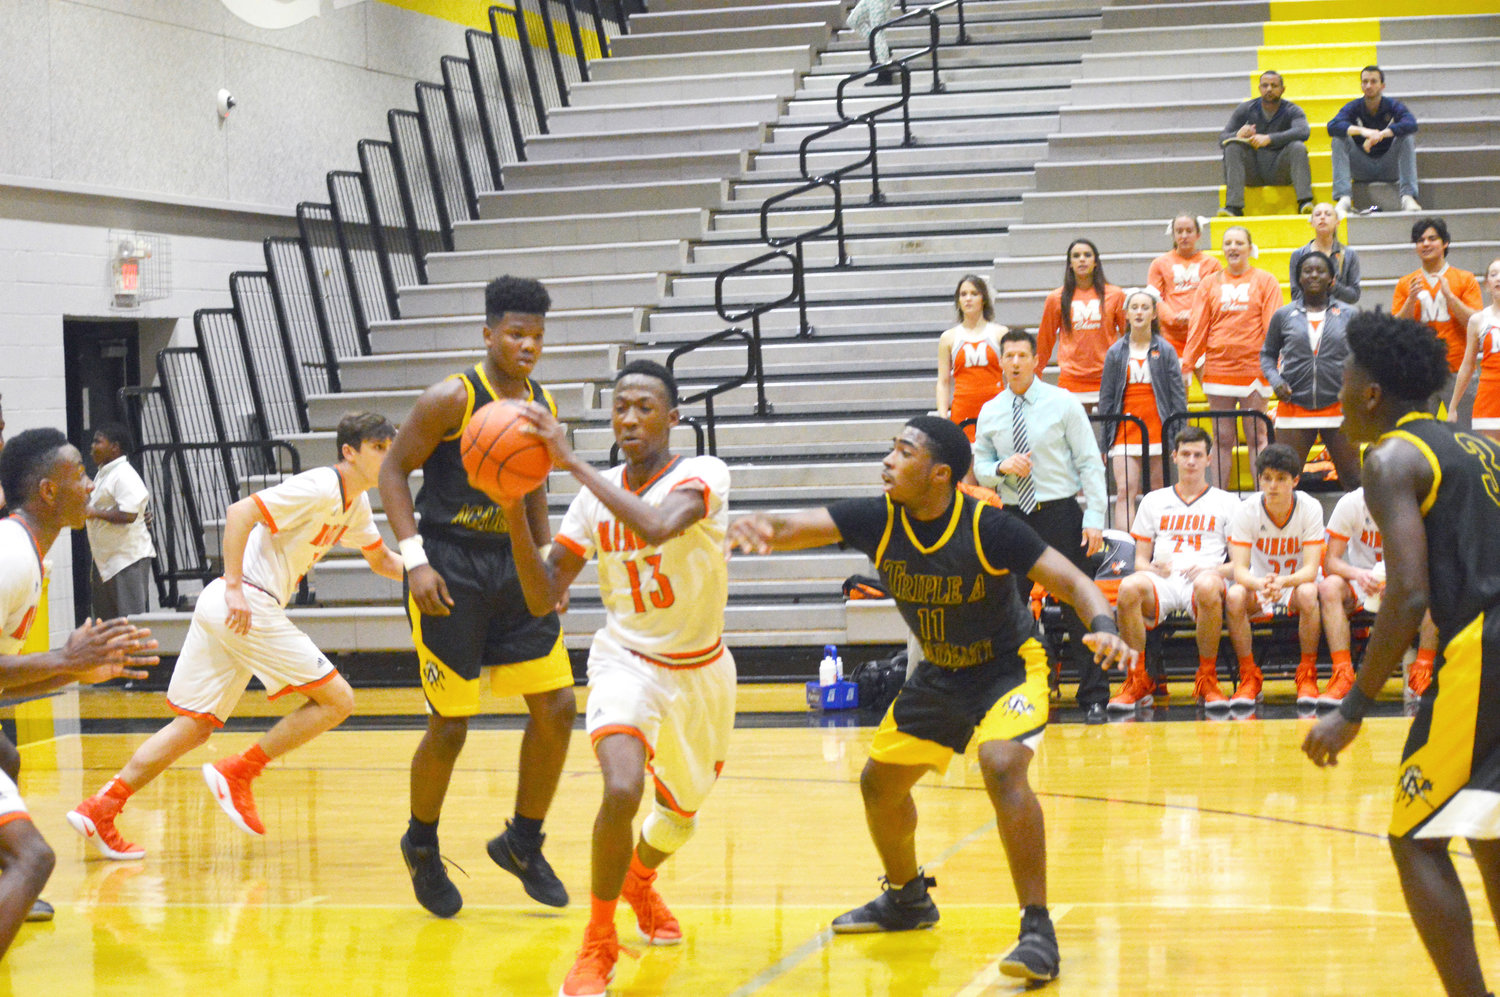 Mineola’s Shaw Franklin (13) gets ready to bounce pass after coming down with a defensive rebound in last Tuesday’s bi-district game against Triple A Academy.